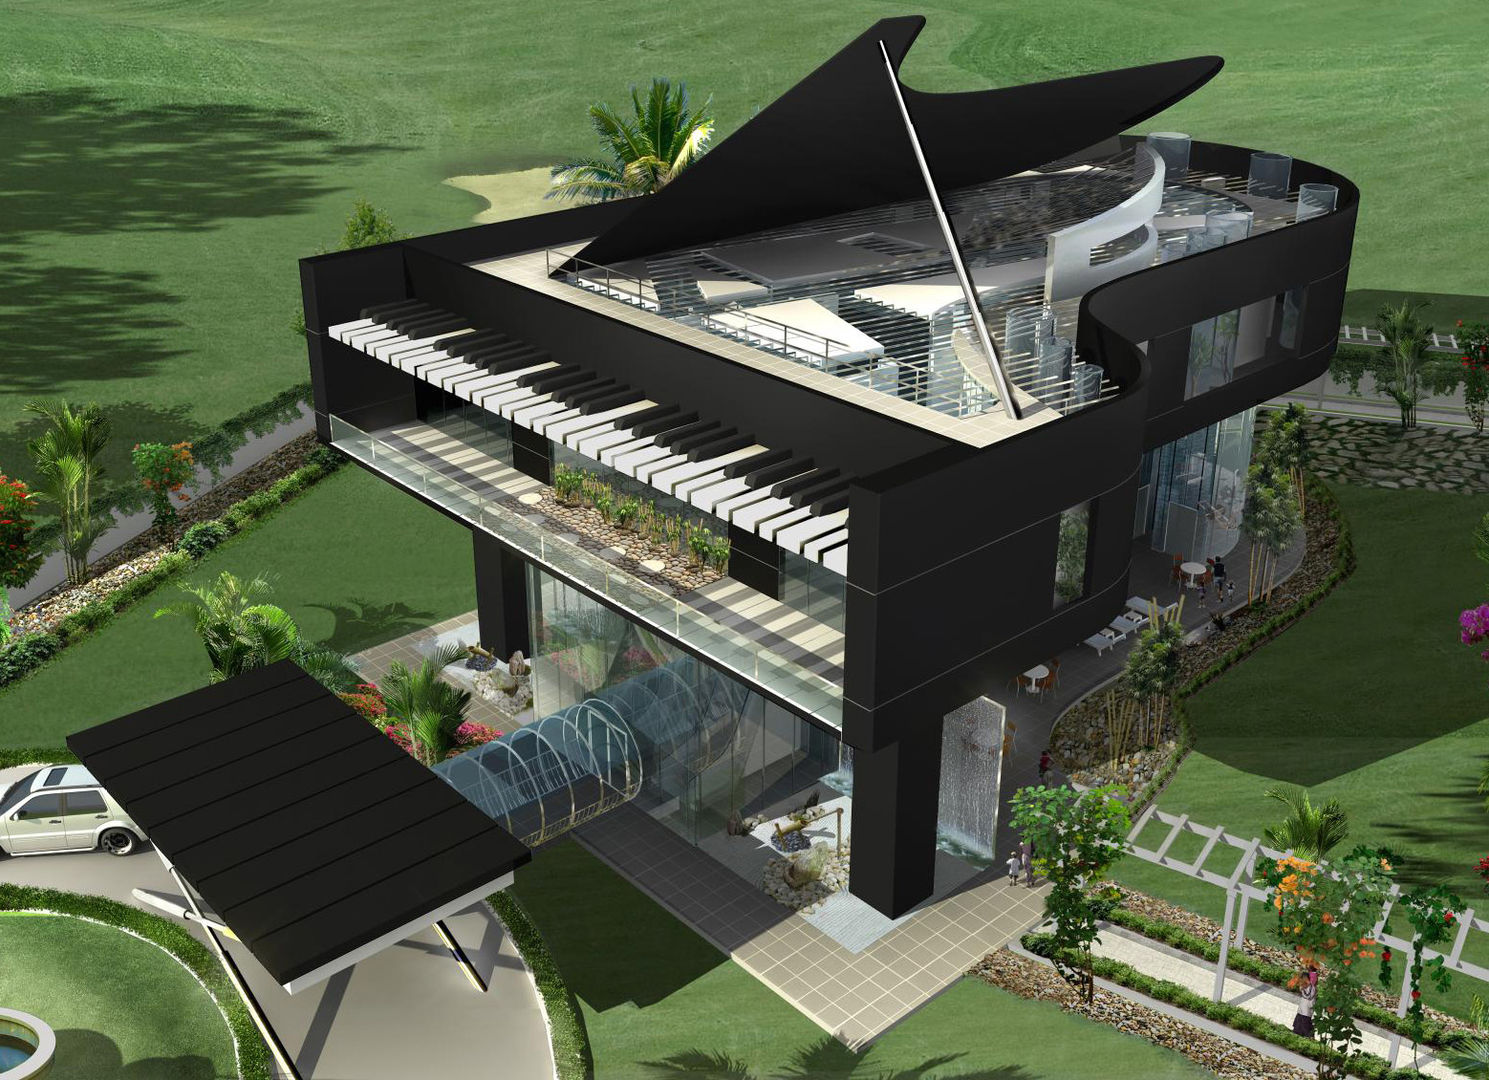 Proposed Musical residence at Chennai, Offcentered Architects Offcentered Architects Eclectic style houses Building,Property,Green,Plant,Piano,Musical instrument,Architecture,Keyboard,Urban design,Grass